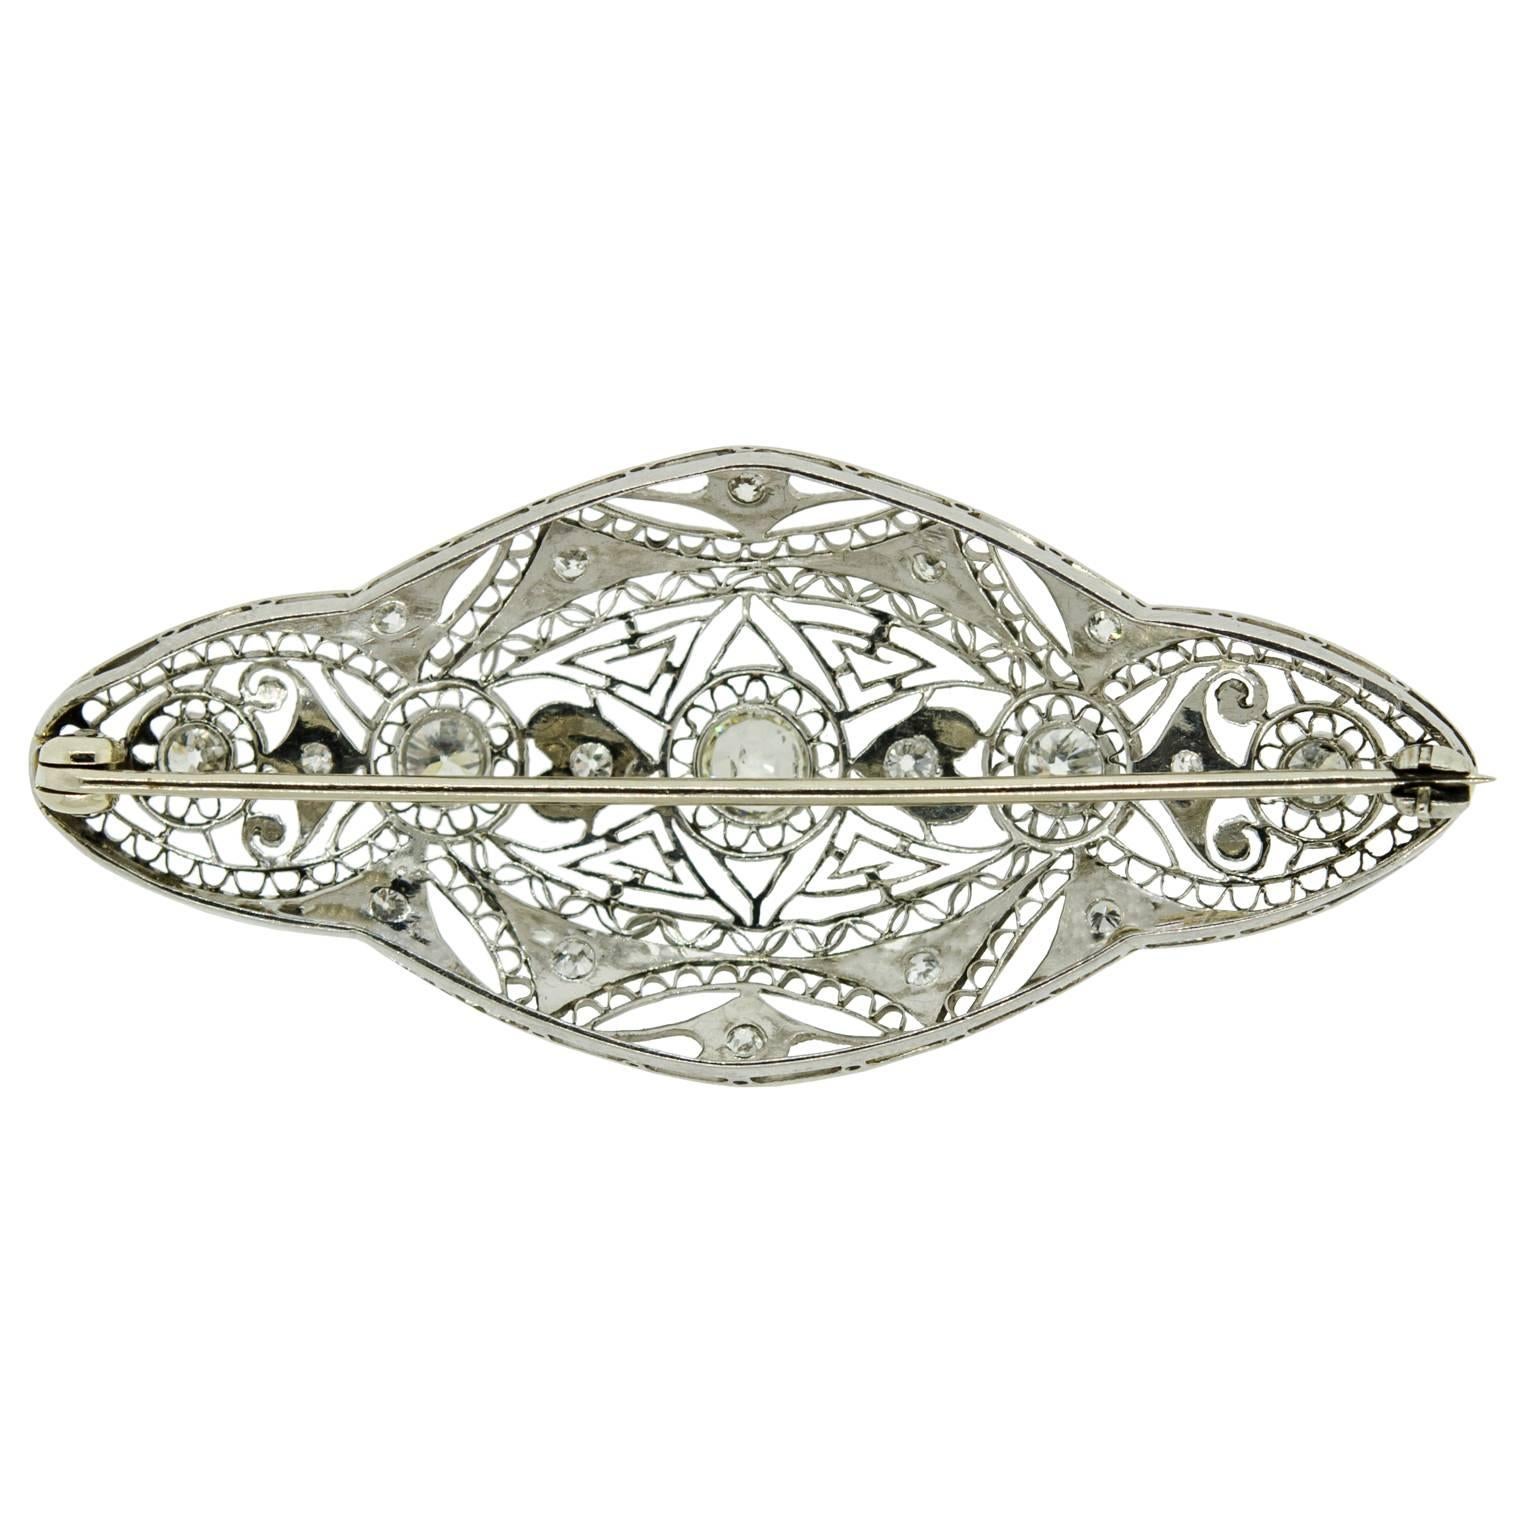 Art Deco 1920s Charming Lady's Diamond Gold Brooch For Sale